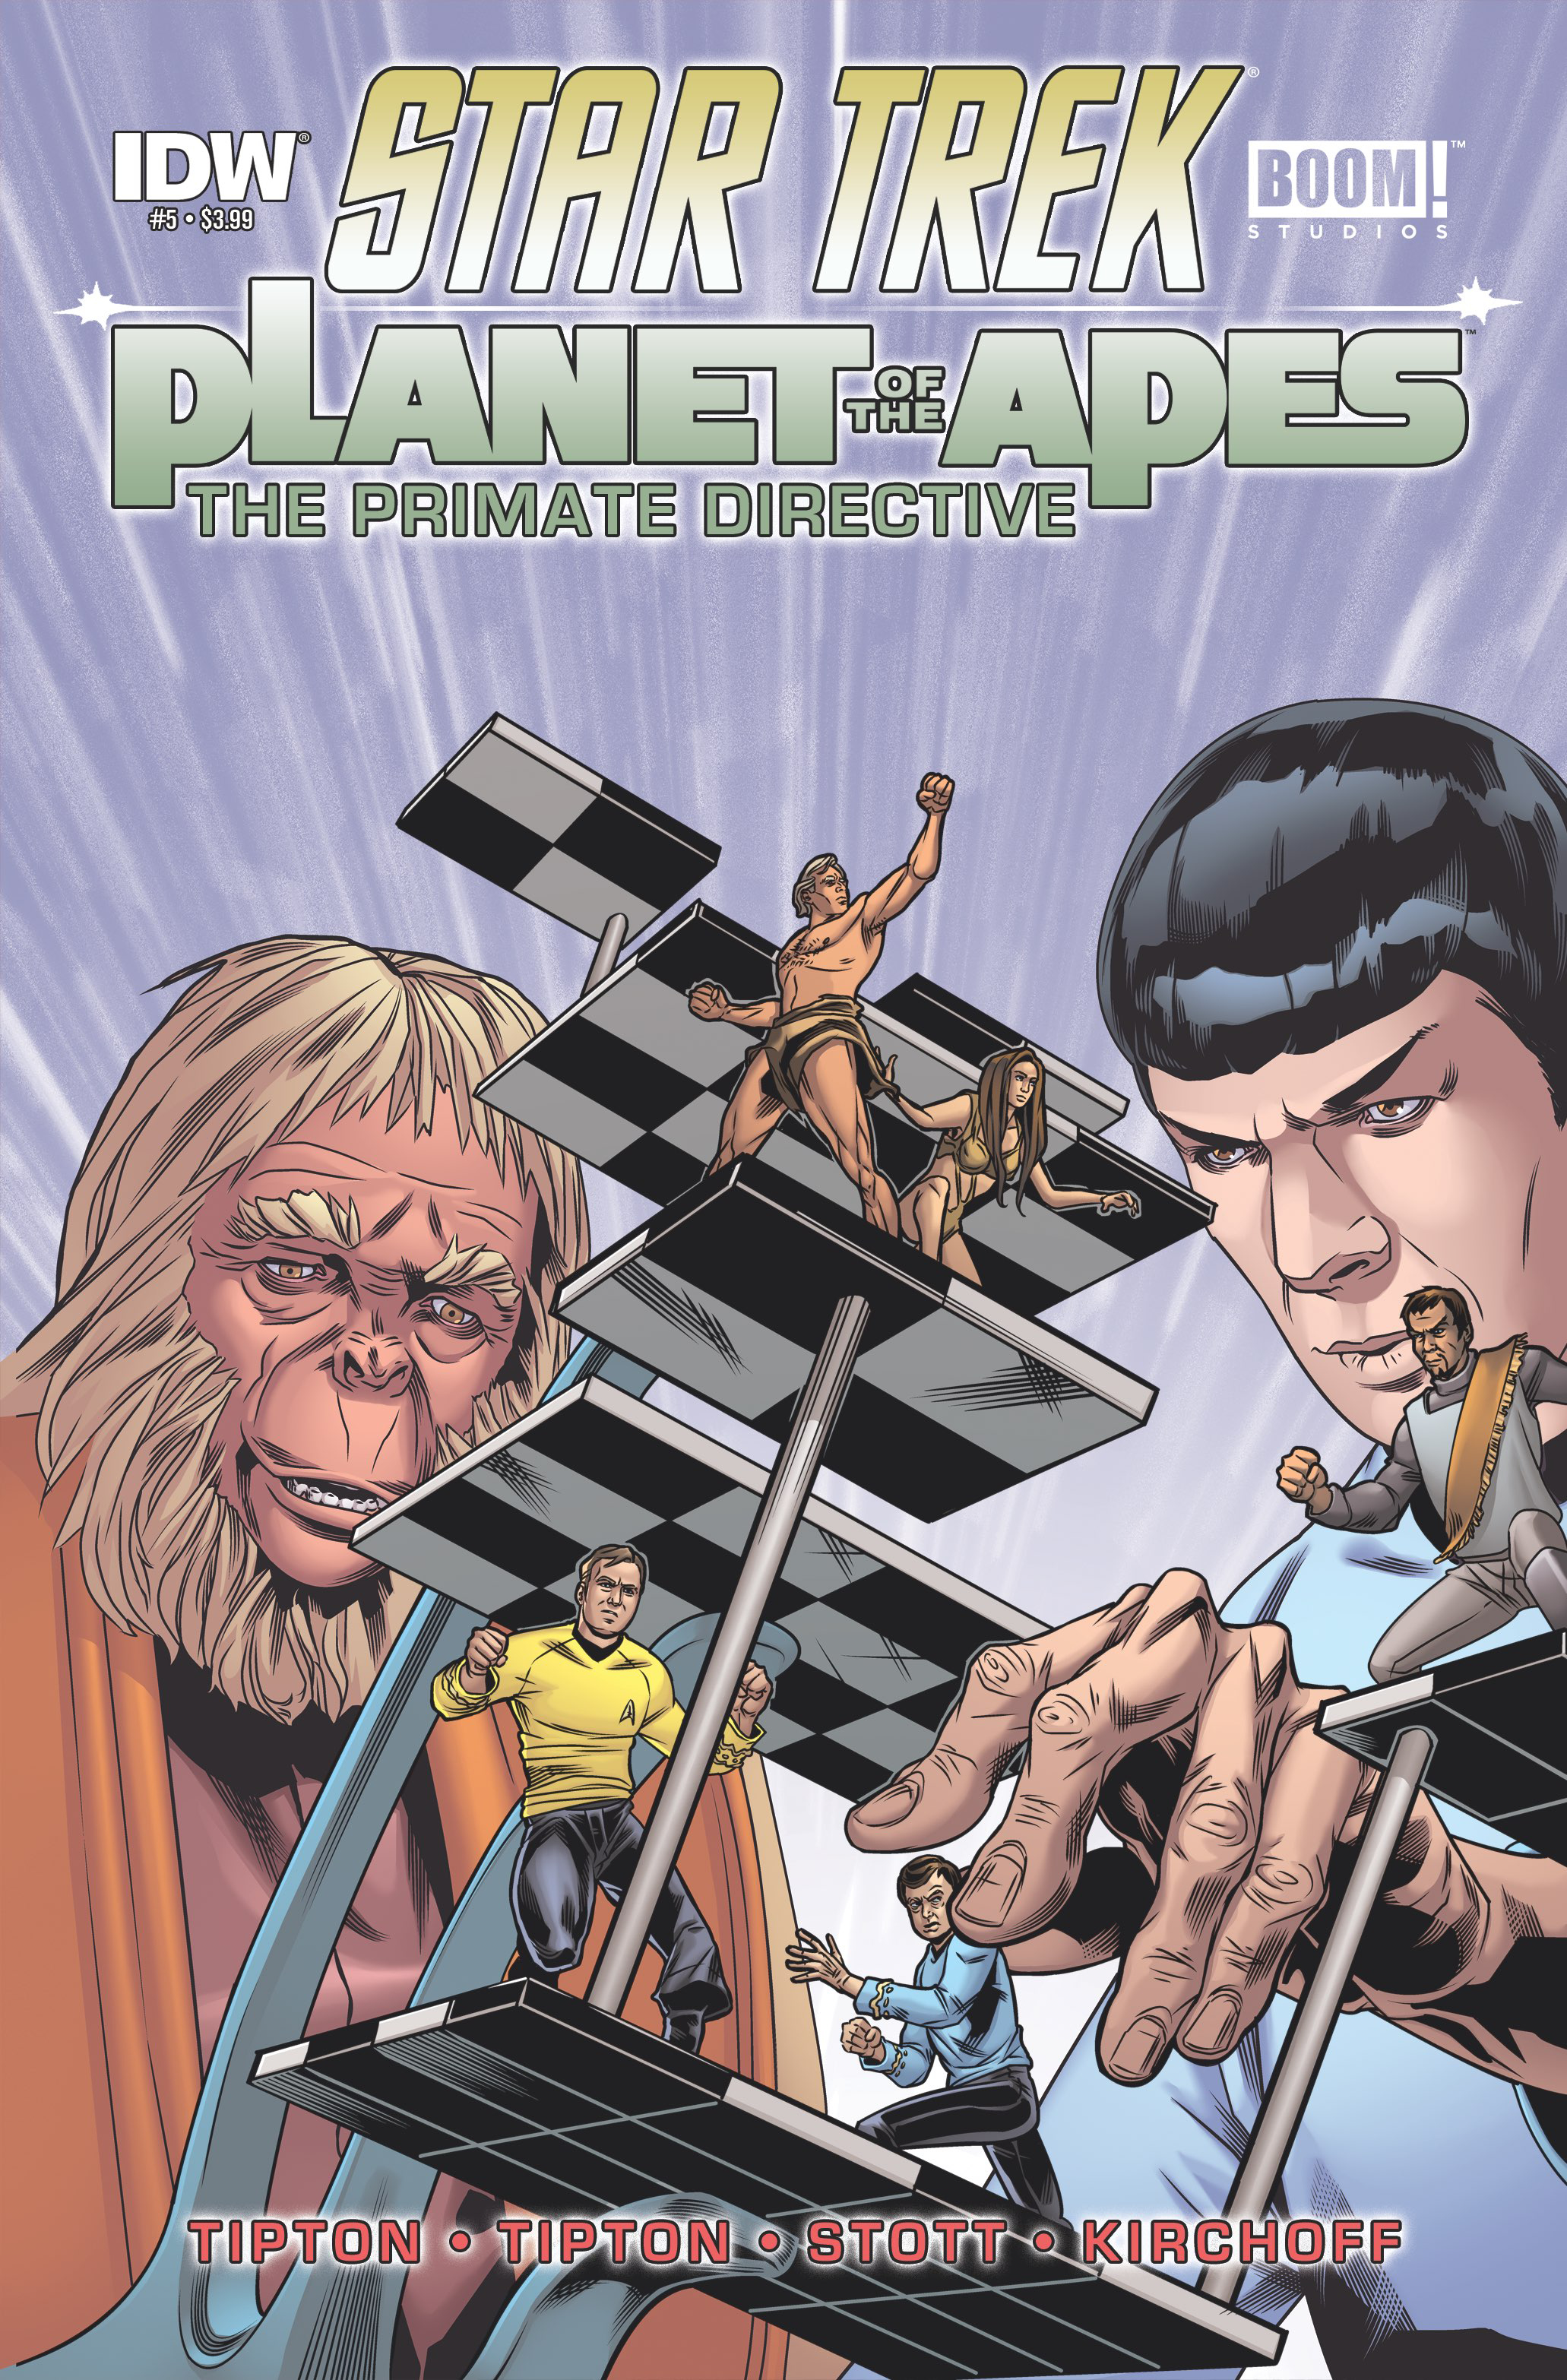 STAR TREK PLANET OF THE APES #5 (OF 5)